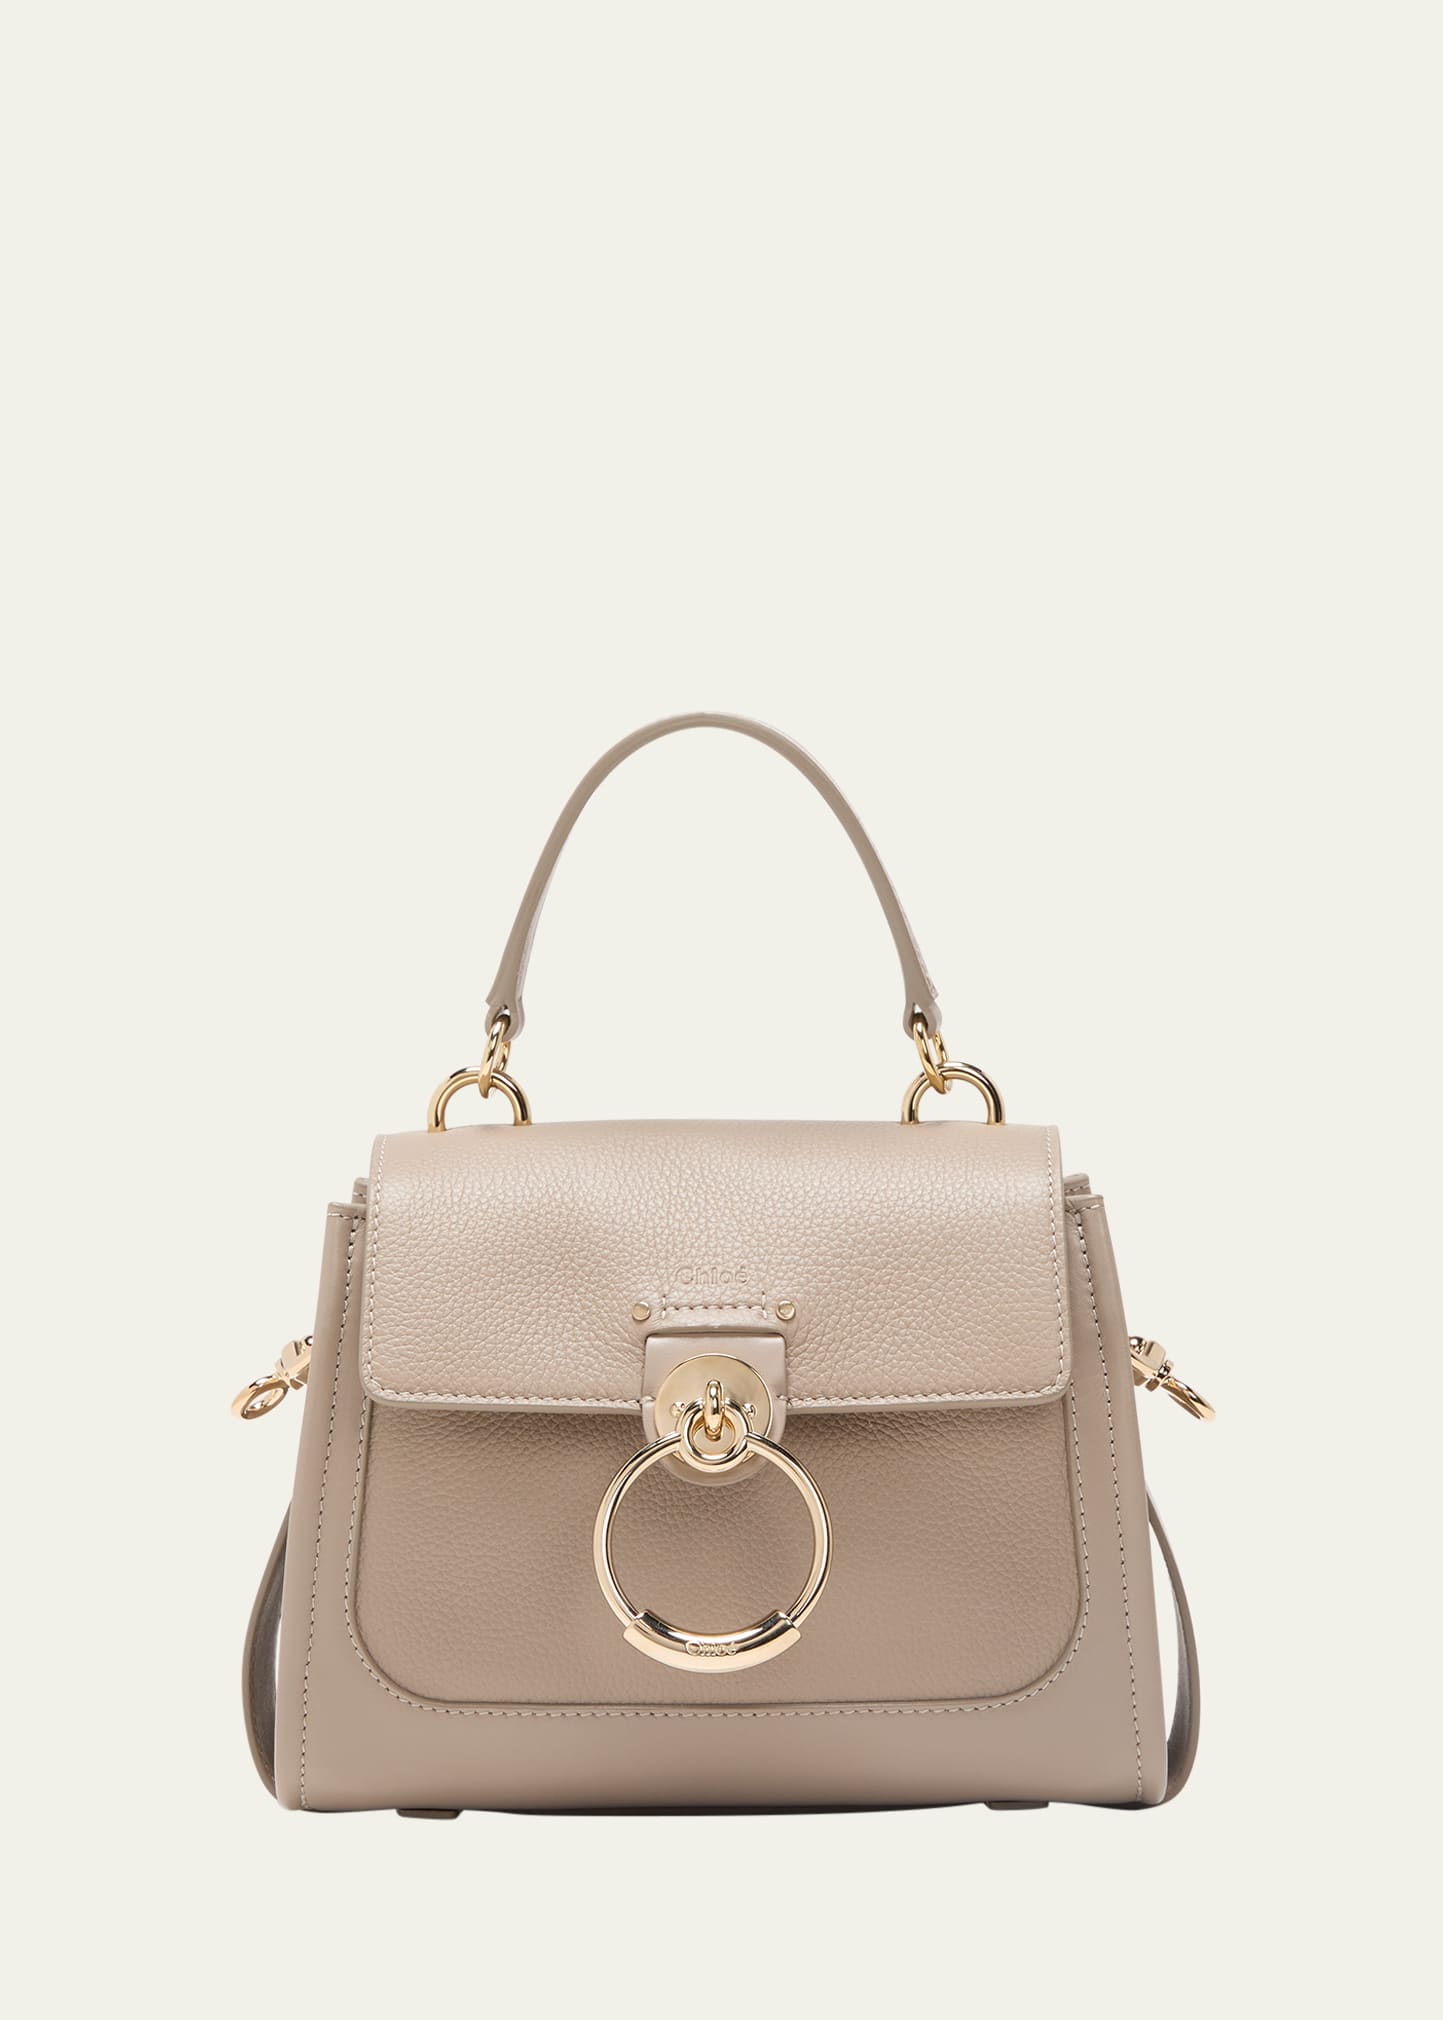 Chloé Brown Leather Small Tess Crossbody Bag, Best Price and Reviews